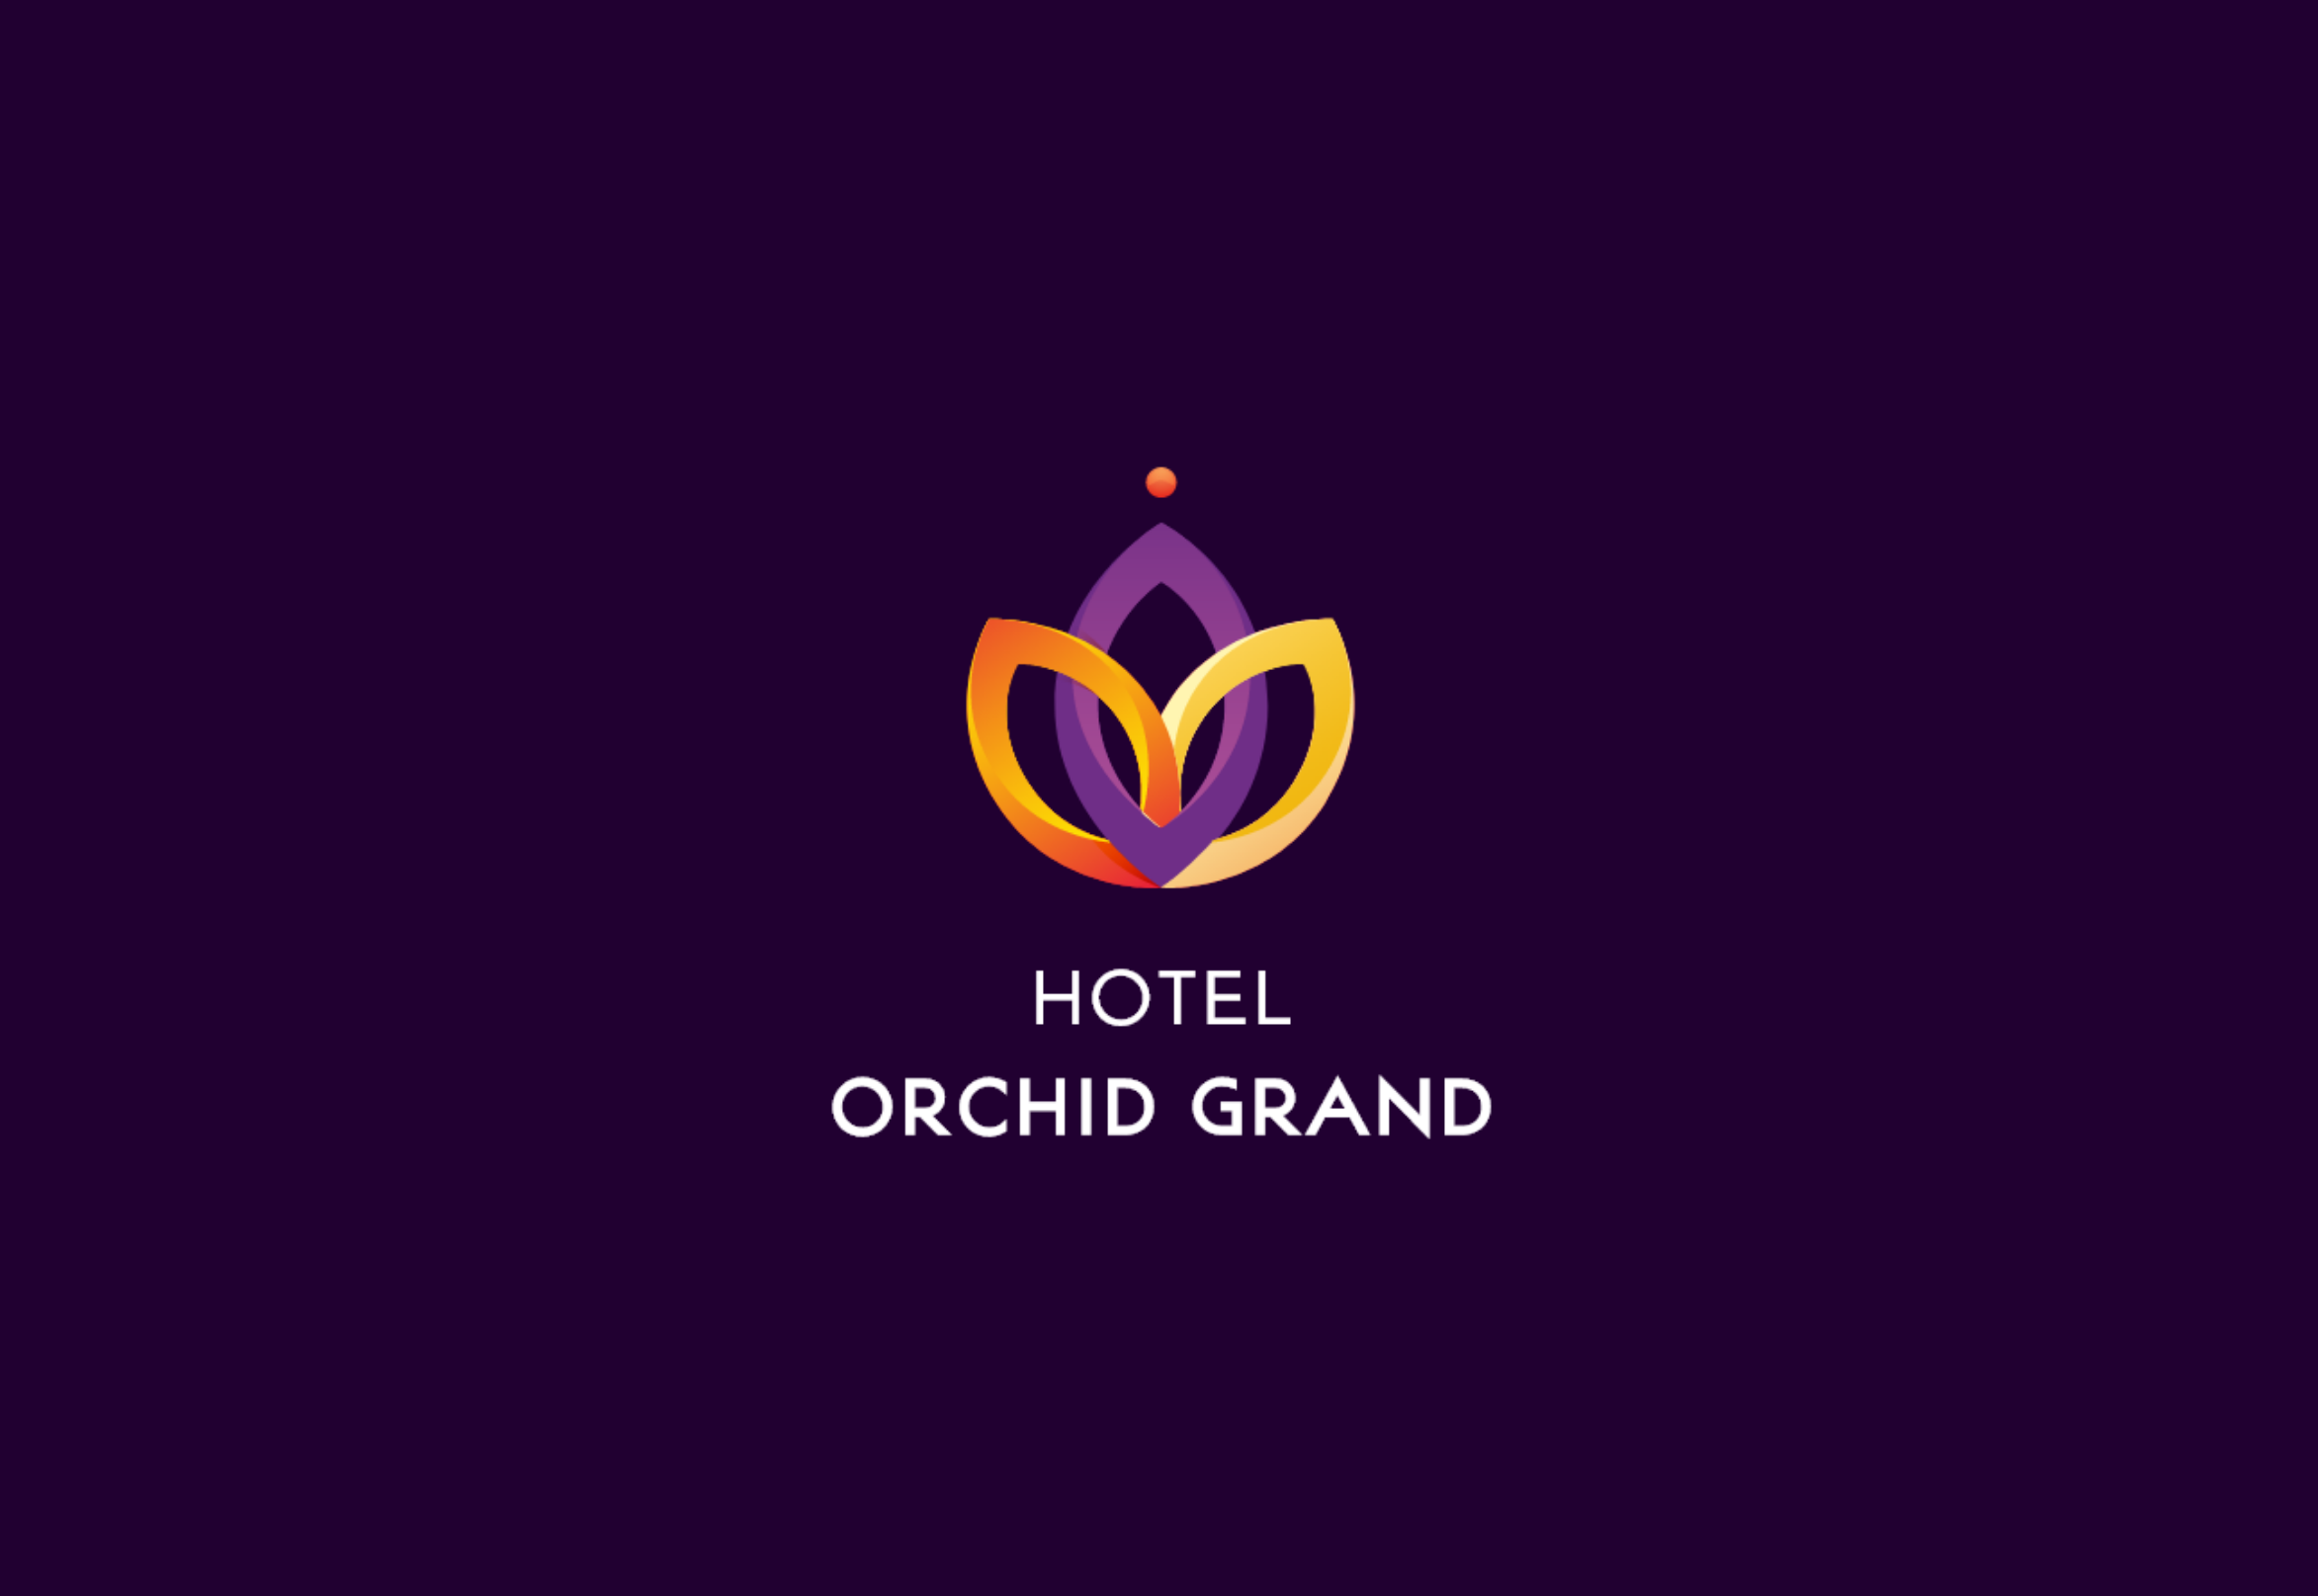 Brand identity of Orchid Grand